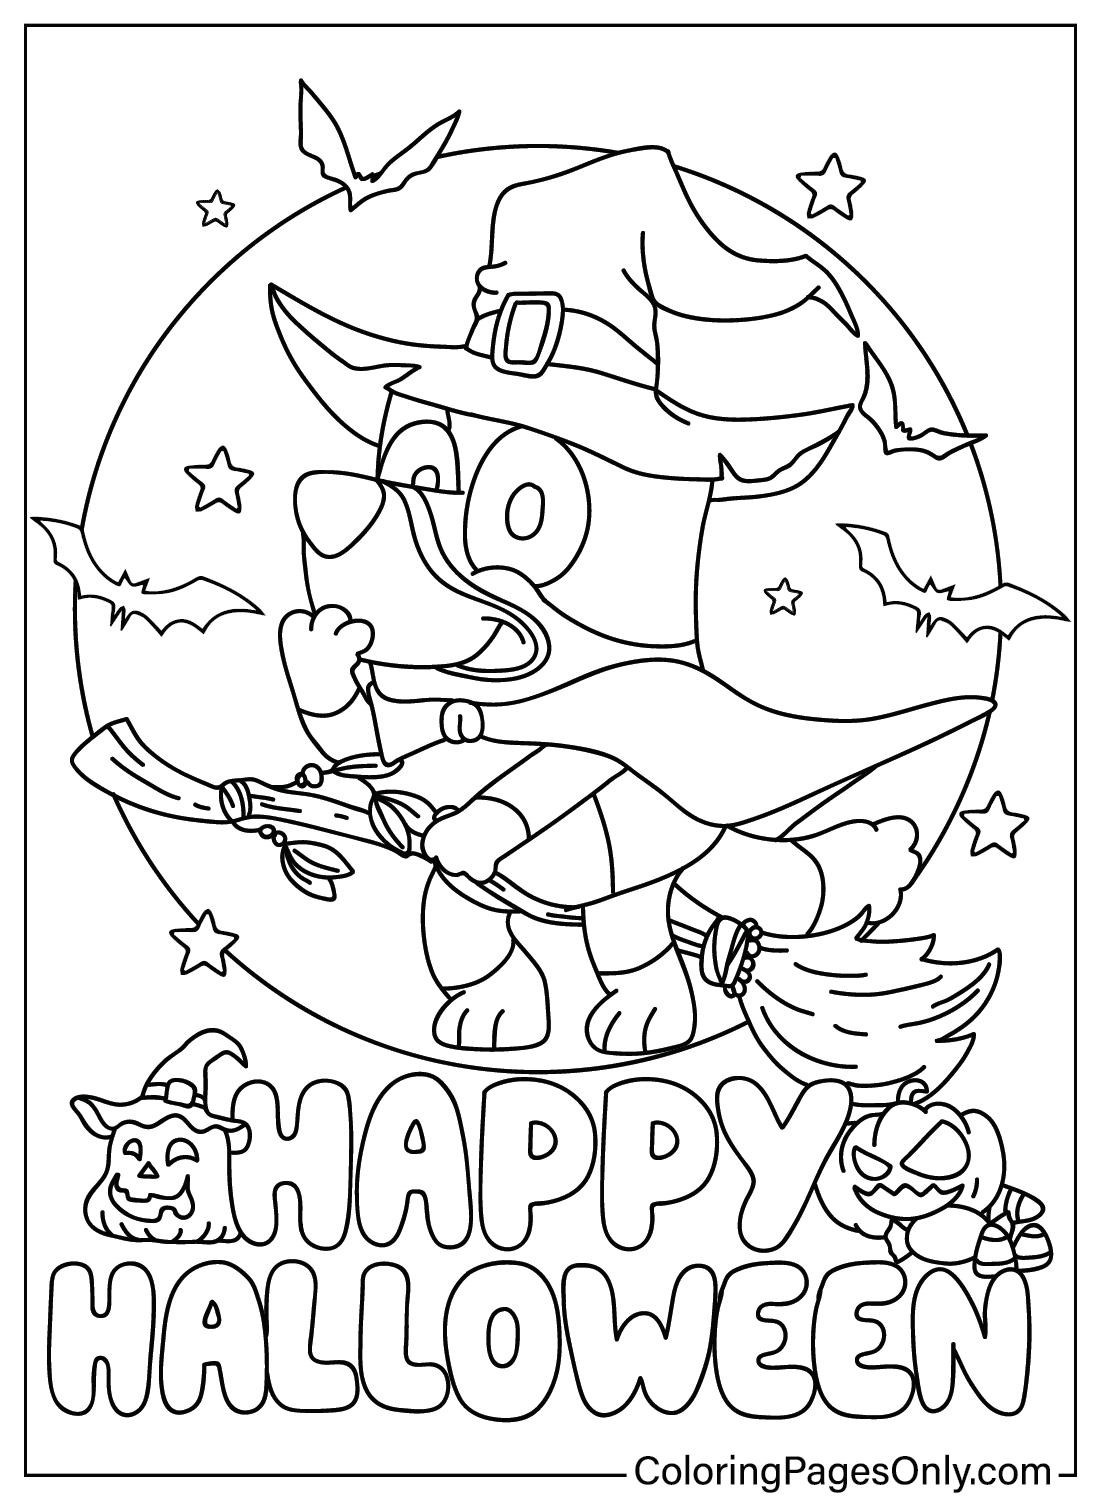 Bluey Halloween Coloring Pages to for Kids from Bluey Halloween